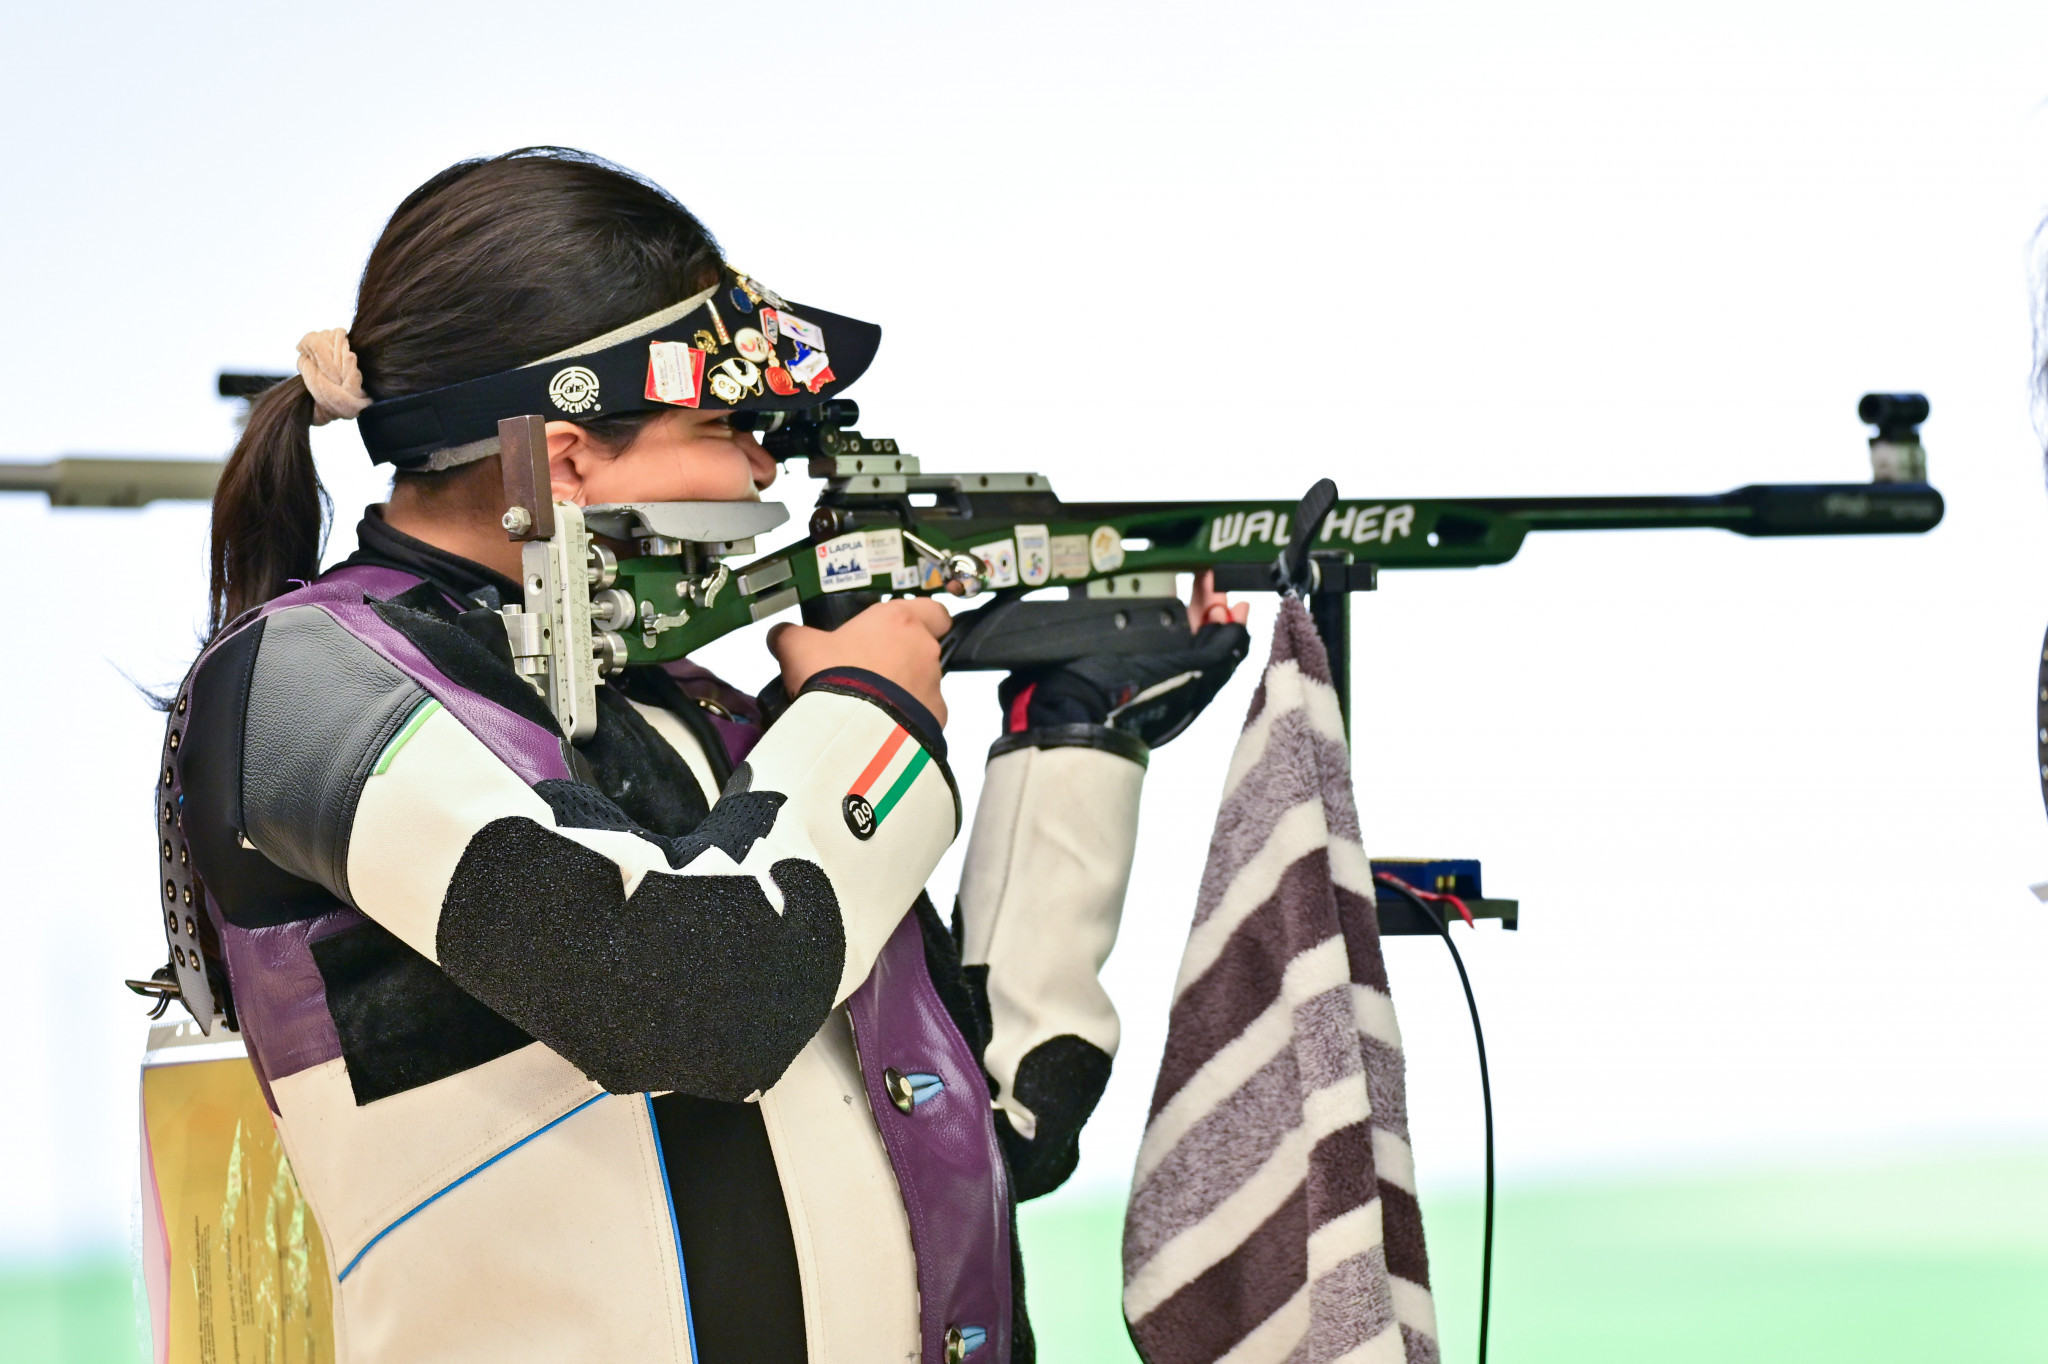 India's Sift Kaur Samra broke the women's 50m rifle 3 positions world record by 2.6 points with a final score of 469.6 ©Hangzhou 2022